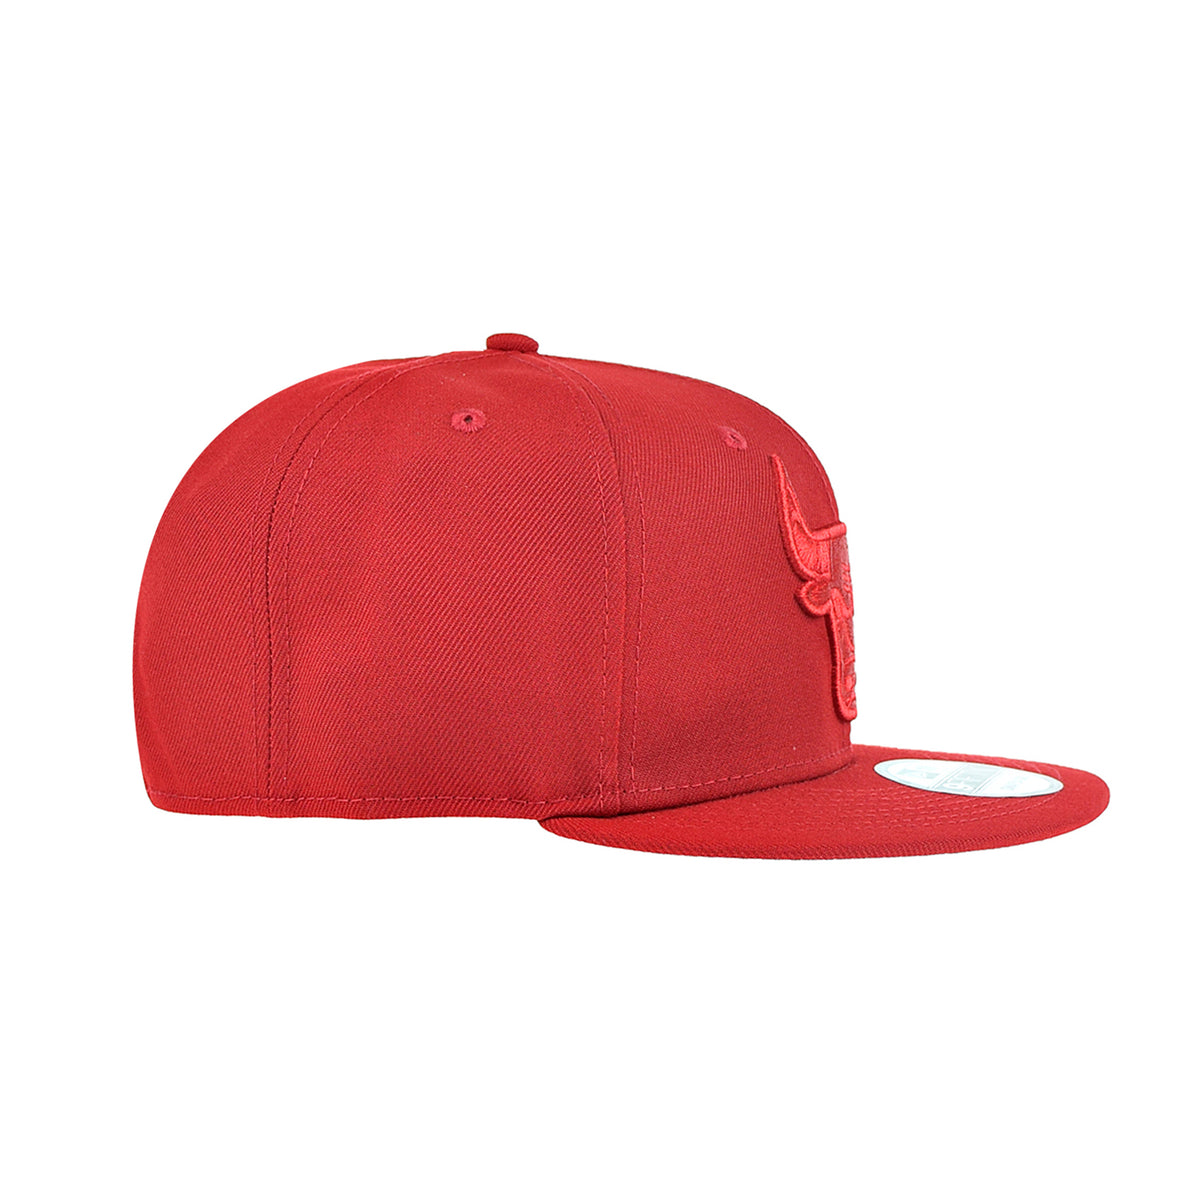 New Era Powder Blue/Red Chicago Bulls 2-Tone Color Pack 9FIFTY Snapback Hat